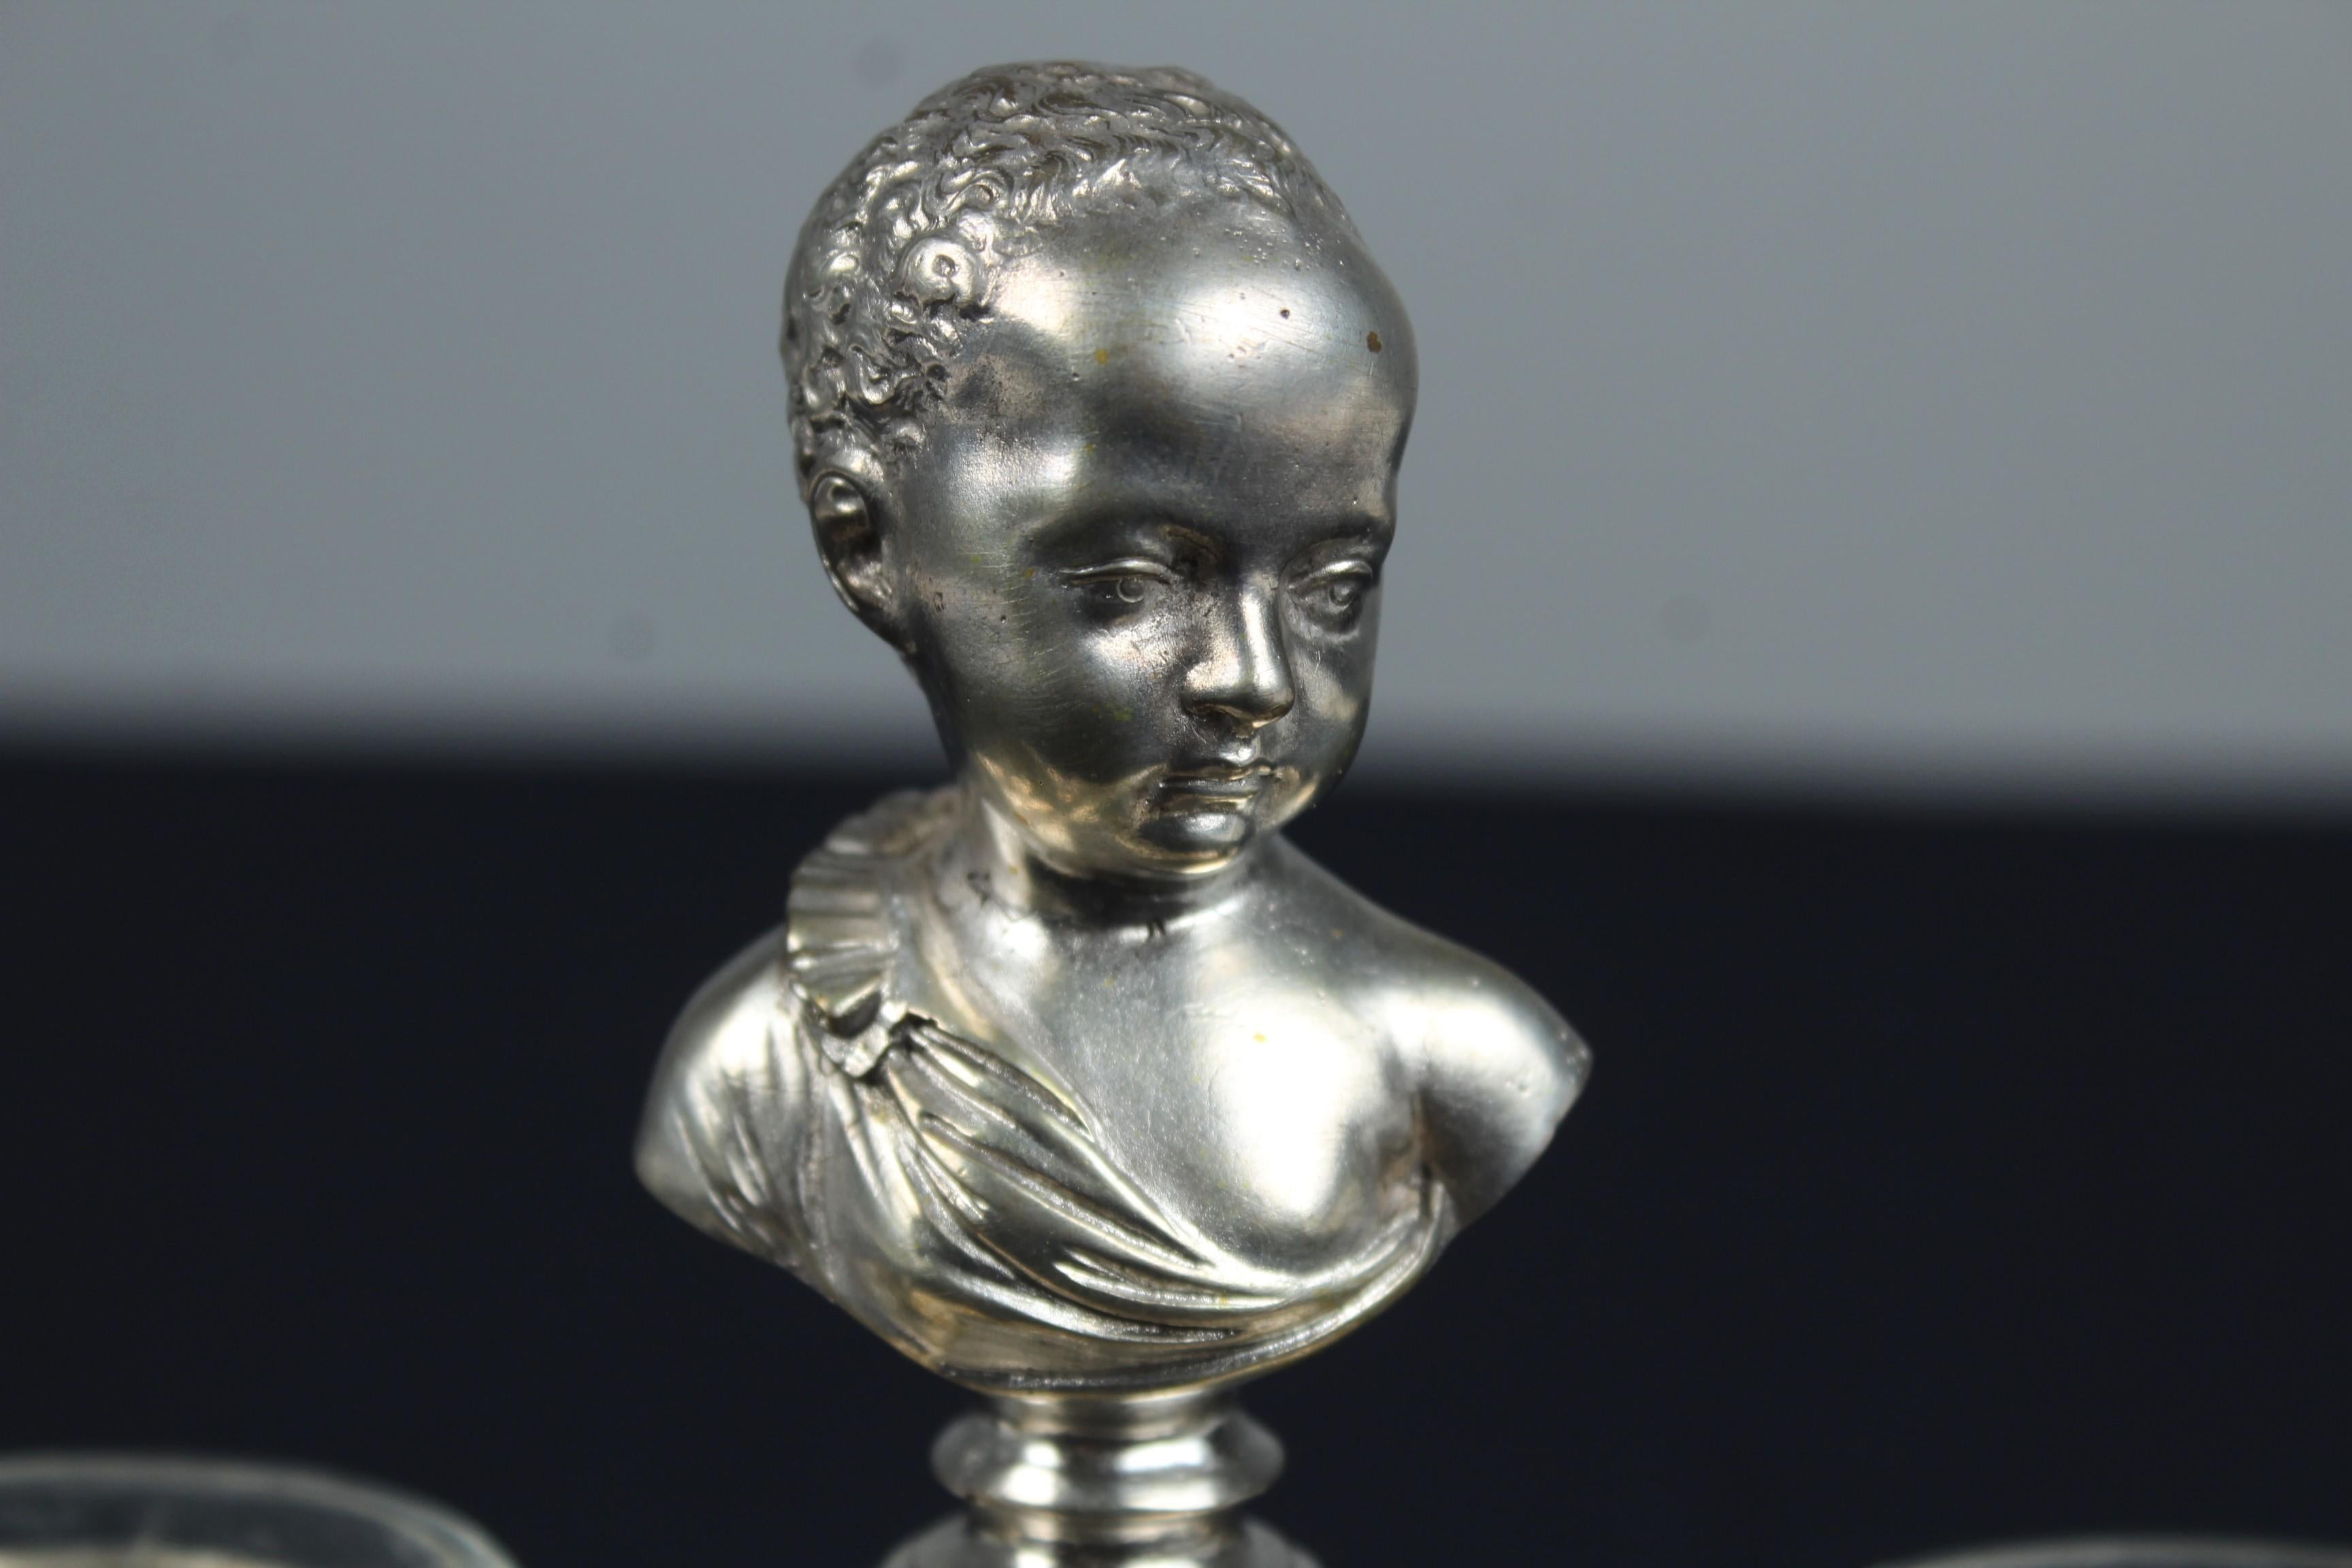 Beautiful inkwell with a small bust in the center and two glass inkwells on its sides.
Nicely silvered and cleaned condition.
France, 19th century.